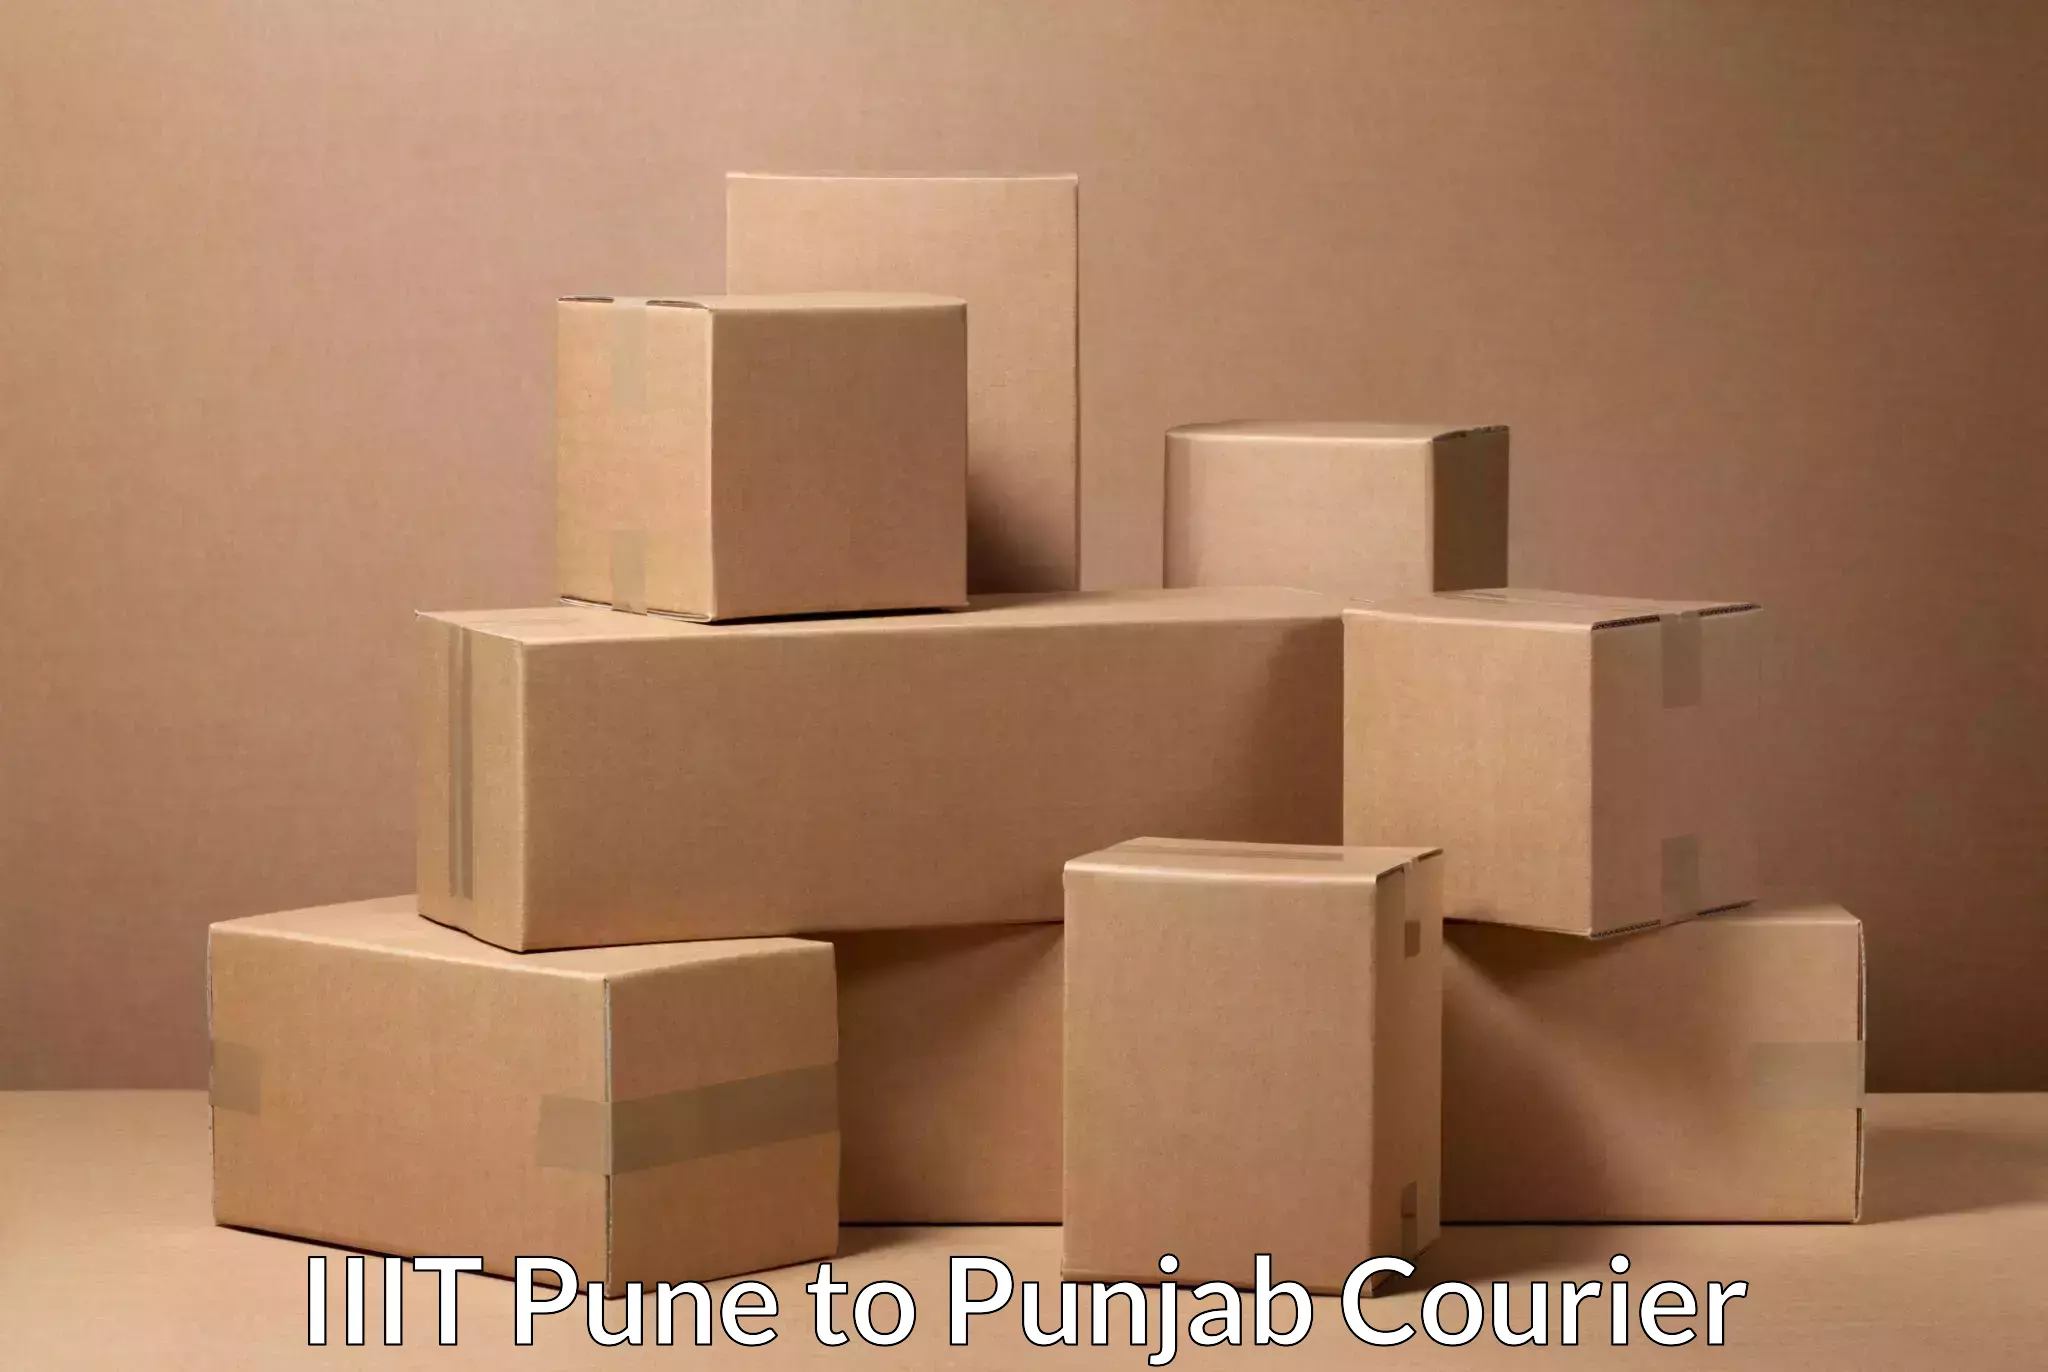 Small parcel delivery IIIT Pune to Ajnala